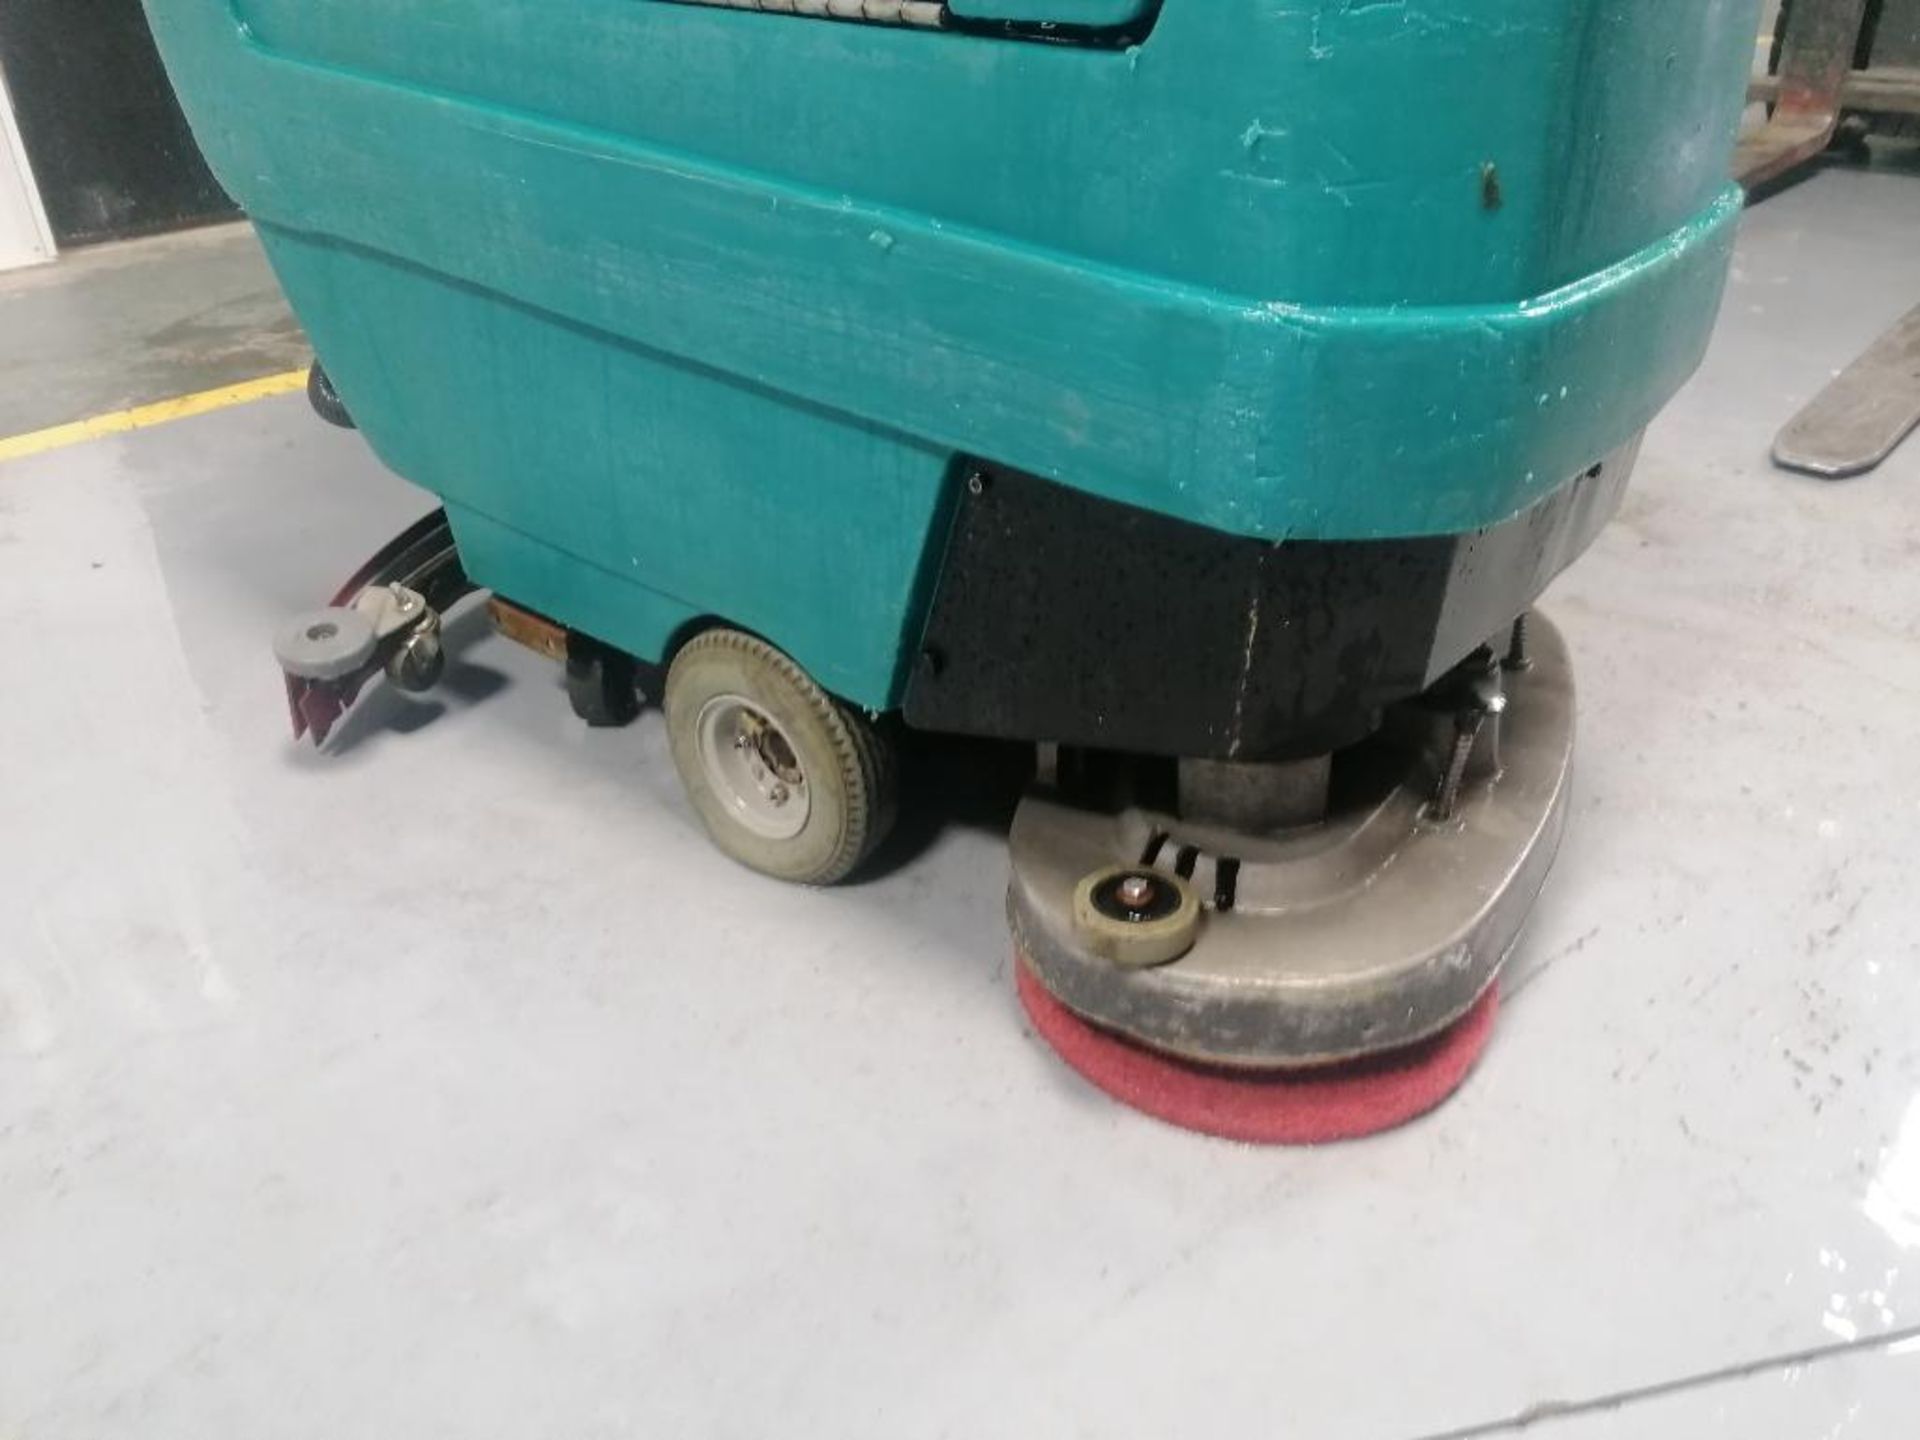 Tennant 5400 Floor Scrubber, Serial #540010229139 24 V, 21 Hours. Located in Mt. Pleasant, IA. - Image 10 of 19